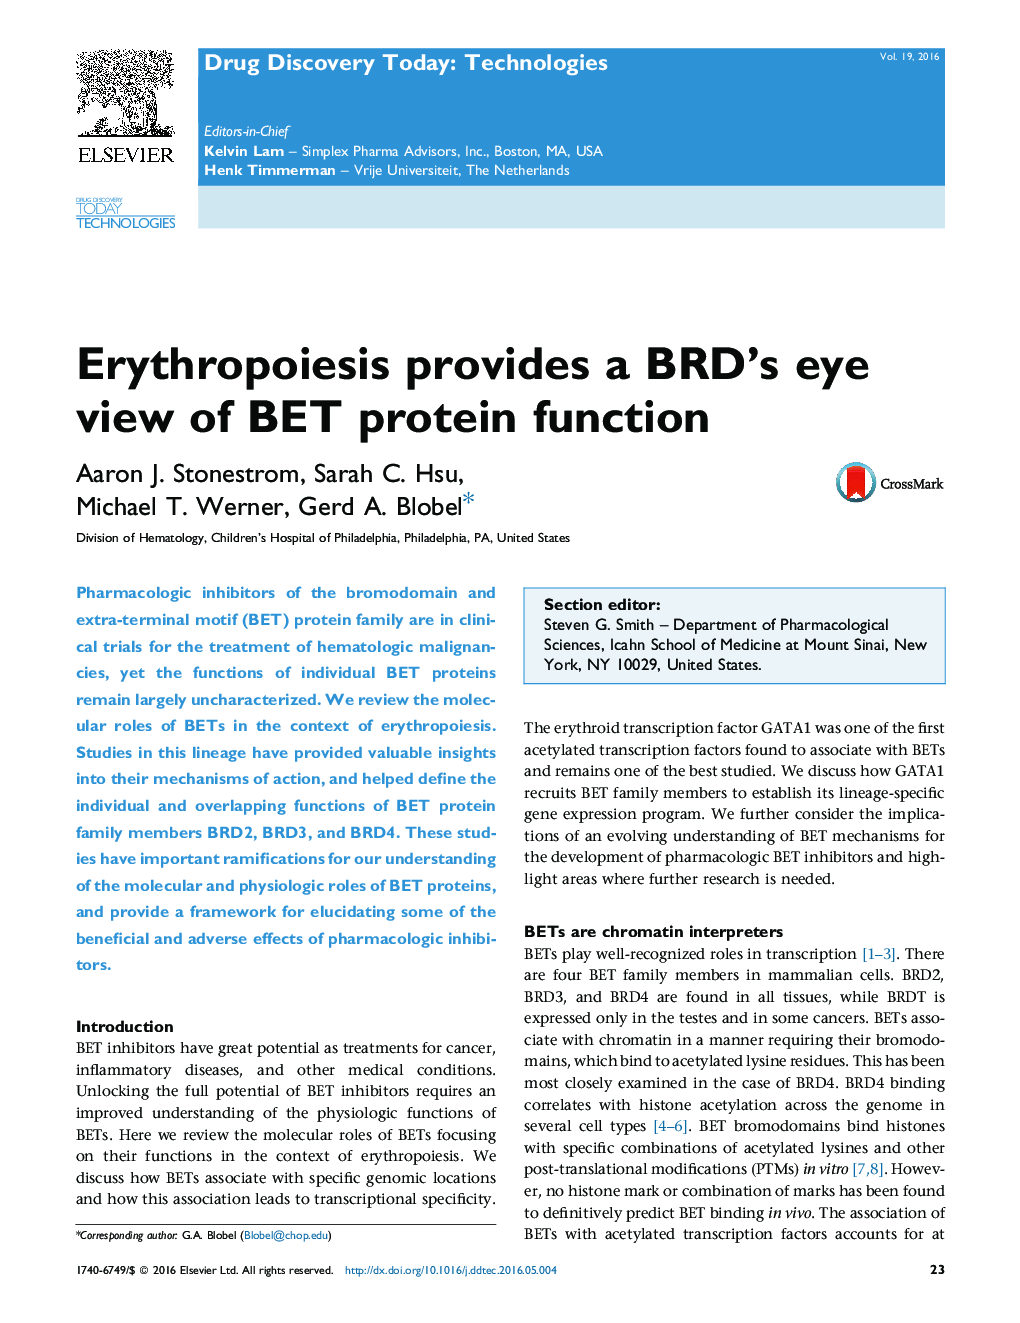 Erythropoiesis provides a BRD's eye view of BET protein function